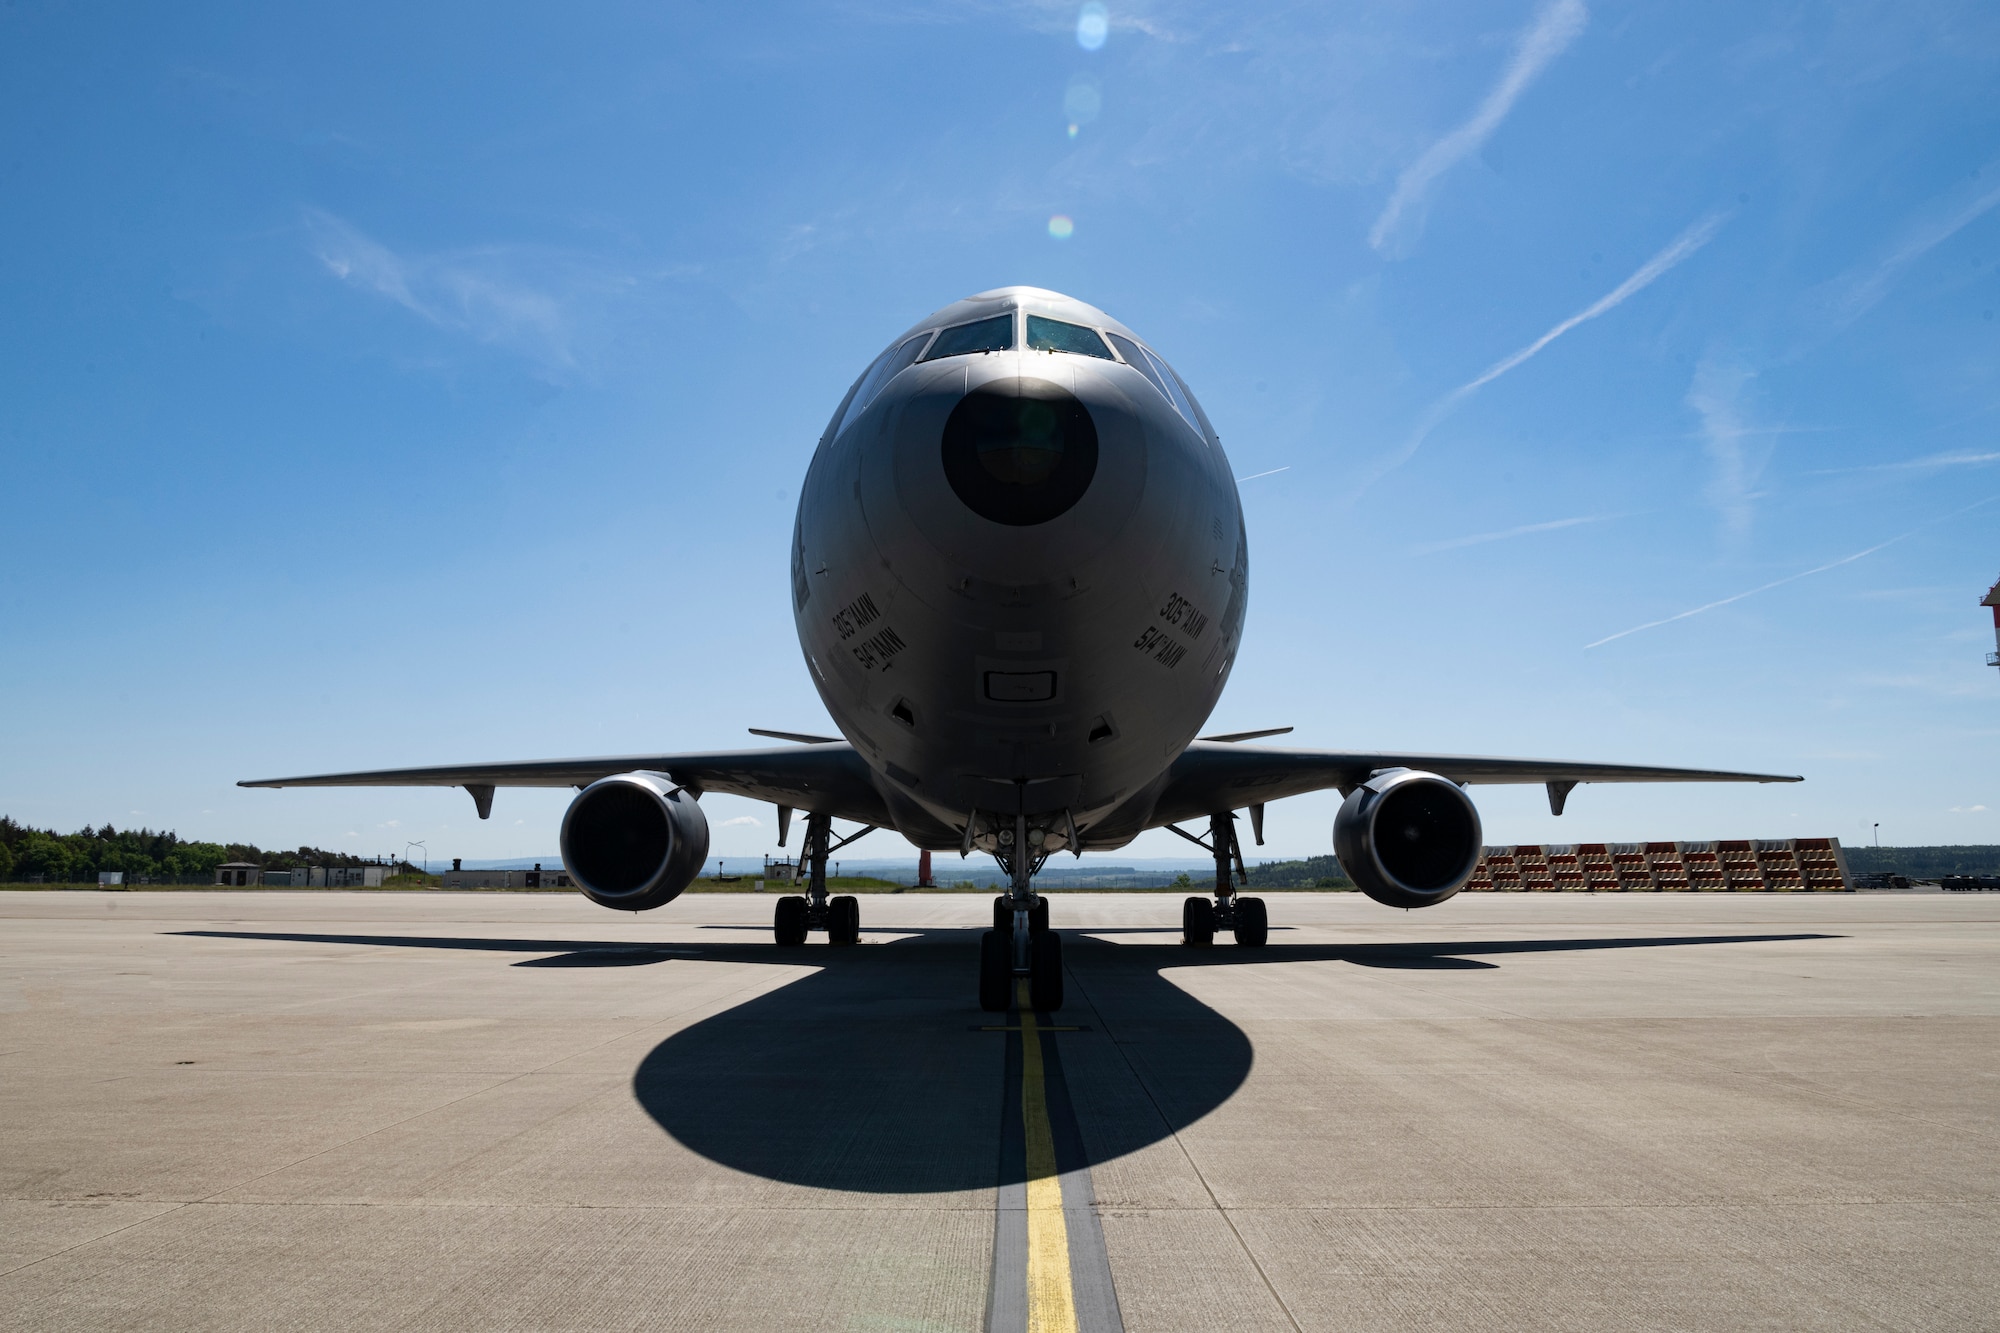 A KC-10 Extender aircraft assigned to the 305th Air Mobility Wing at Joint Base McGuire-Dix-Lakehurst, New Jersey, arrives at Spangdahlem Air Base, Germany, May 14, 2022. Movements such as these are designed to respond to the current security environment and reinforce the deterrent and defensive posture on NATO’s eastern flank. (U.S. Air Force photo by Senior Airman Ali Stewart)